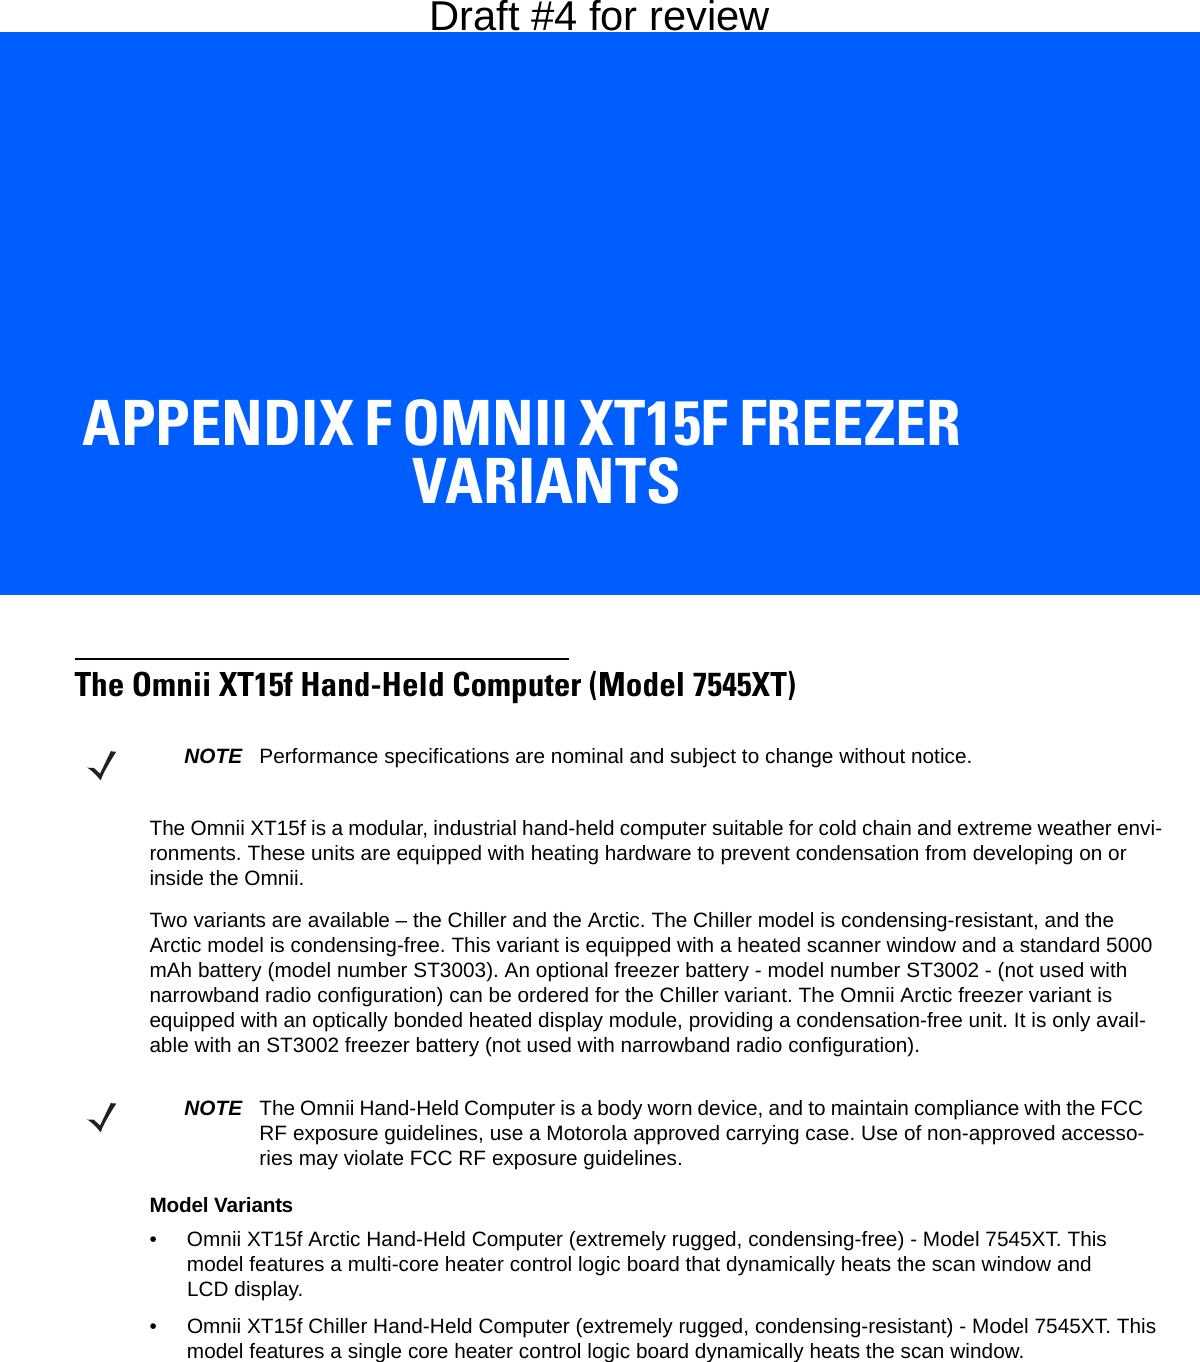 APPENDIX F OMNII XT15F FREEZER VARIANTSFOmnii XT15f Freezer VariantsThe Omnii XT15f Hand-Held Computer (Model 7545XT)The Omnii XT15f is a modular, industrial hand-held computer suitable for cold chain and extreme weather envi-ronments. These units are equipped with heating hardware to prevent condensation from developing on or inside the Omnii. Two variants are available – the Chiller and the Arctic. The Chiller model is condensing-resistant, and the Arctic model is condensing-free. This variant is equipped with a heated scanner window and a standard 5000 mAh battery (model number ST3003). An optional freezer battery - model number ST3002 - (not used with narrowband radio configuration) can be ordered for the Chiller variant. The Omnii Arctic freezer variant is equipped with an optically bonded heated display module, providing a condensation-free unit. It is only avail-able with an ST3002 freezer battery (not used with narrowband radio configuration).Model Variants• Omnii XT15f Arctic Hand-Held Computer (extremely rugged, condensing-free) - Model 7545XT. This model features a multi-core heater control logic board that dynamically heats the scan window and LCD display.• Omnii XT15f Chiller Hand-Held Computer (extremely rugged, condensing-resistant) - Model 7545XT. This model features a single core heater control logic board dynamically heats the scan window.NOTE Performance specifications are nominal and subject to change without notice.NOTE The Omnii Hand-Held Computer is a body worn device, and to maintain compliance with the FCC RF exposure guidelines, use a Motorola approved carrying case. Use of non-approved accesso-ries may violate FCC RF exposure guidelines.Draft #4 for review